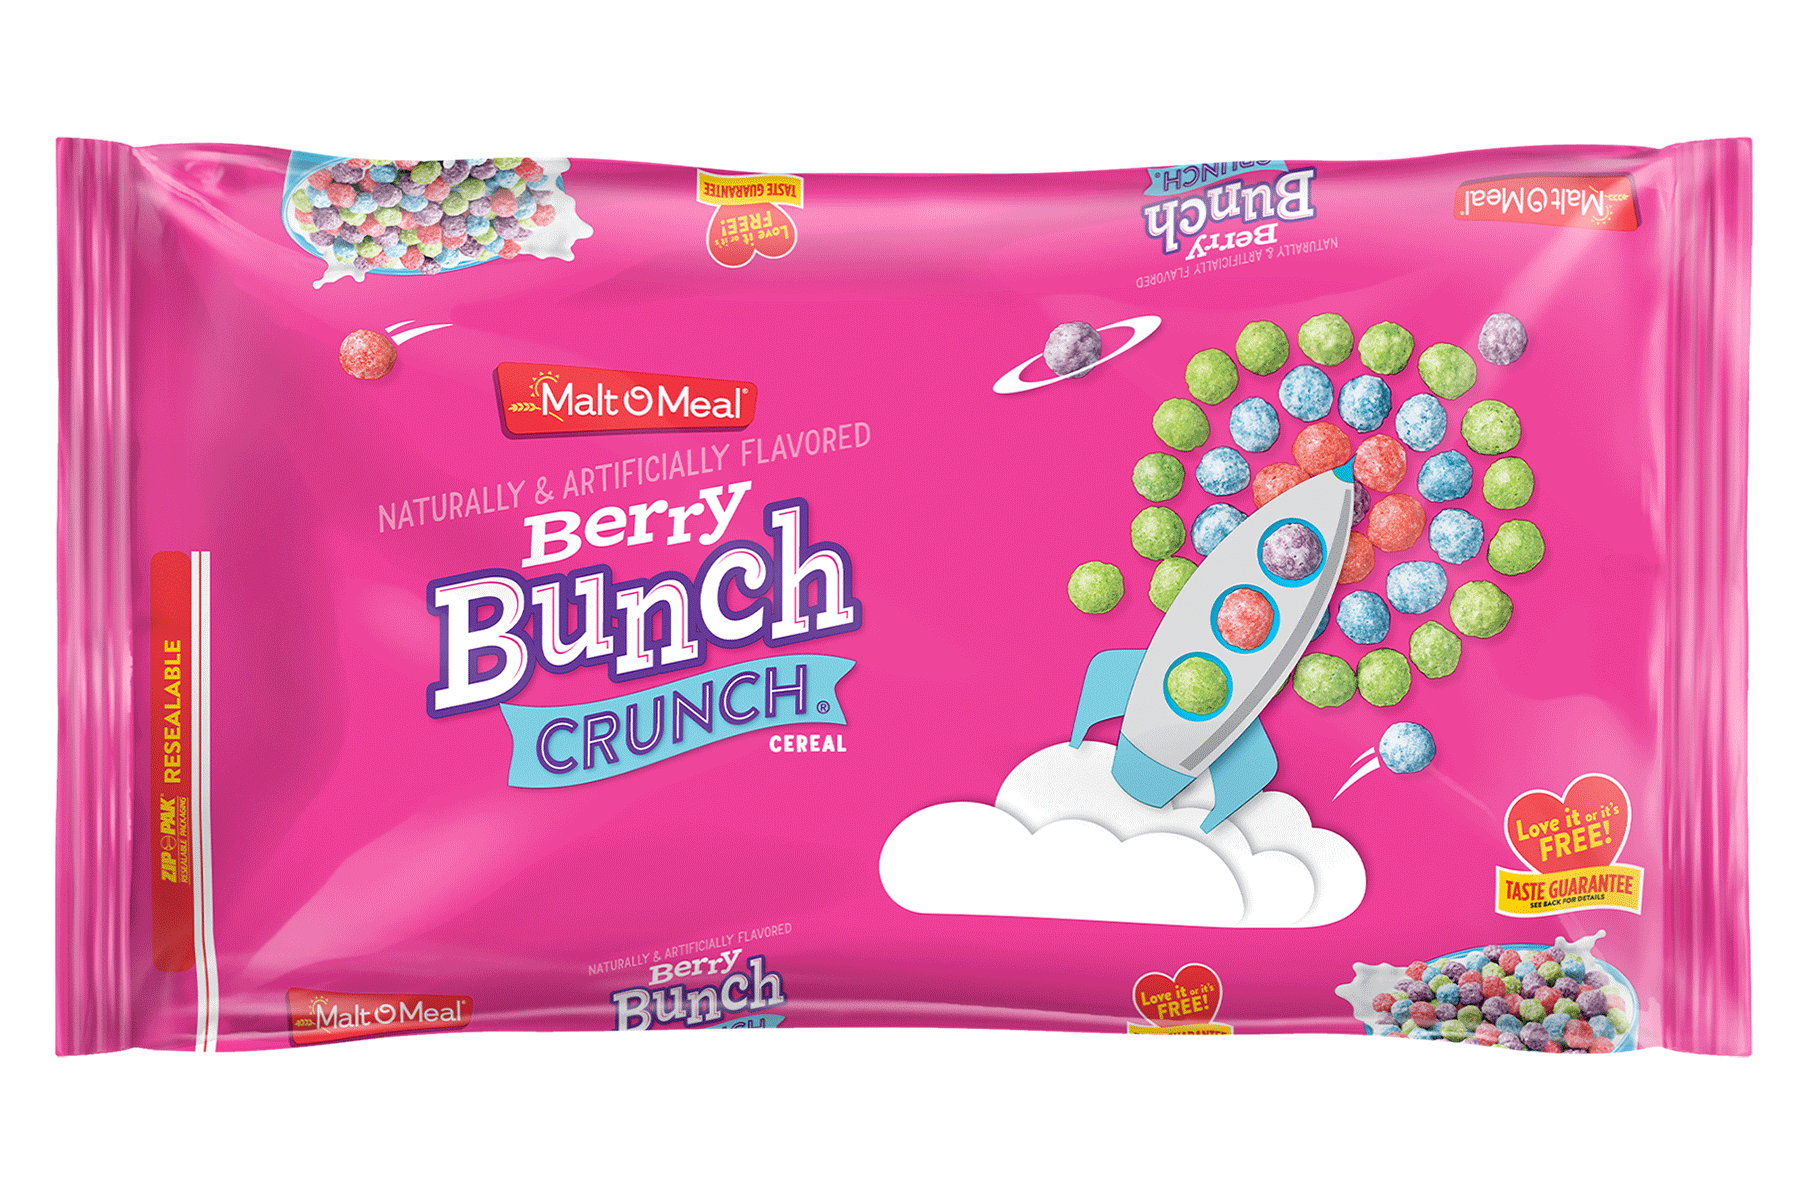 New Berry Bunch Crunch Malt-O-Meal cereal